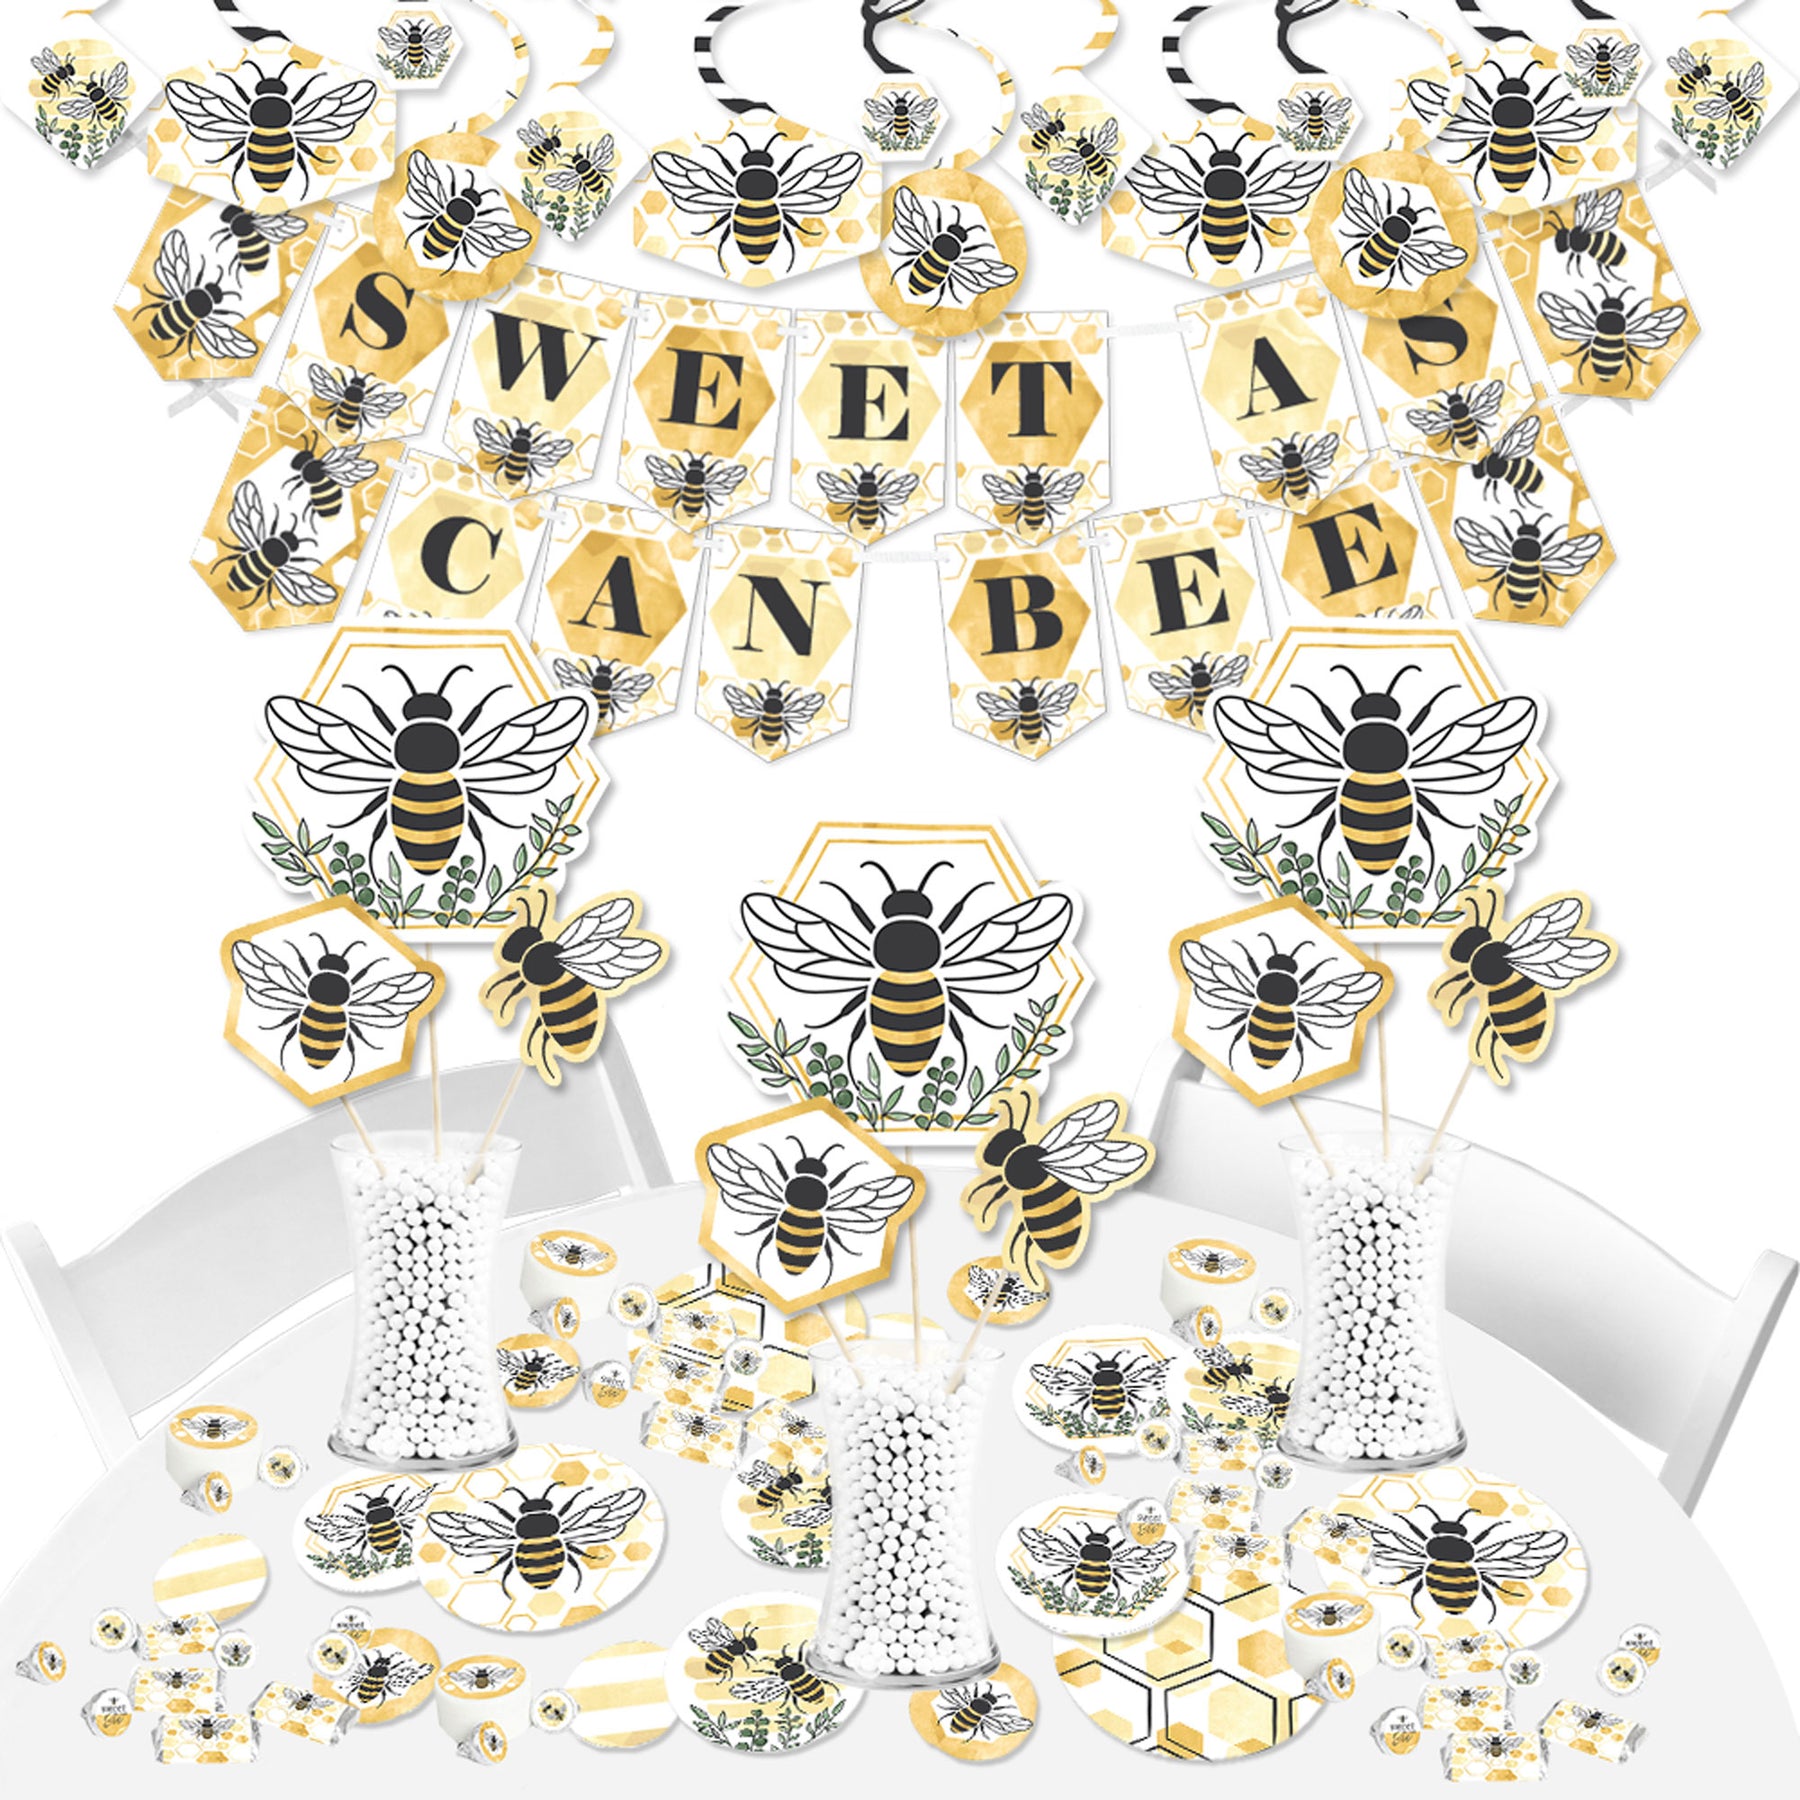 Bumble Bee Party Supplies and Decorations